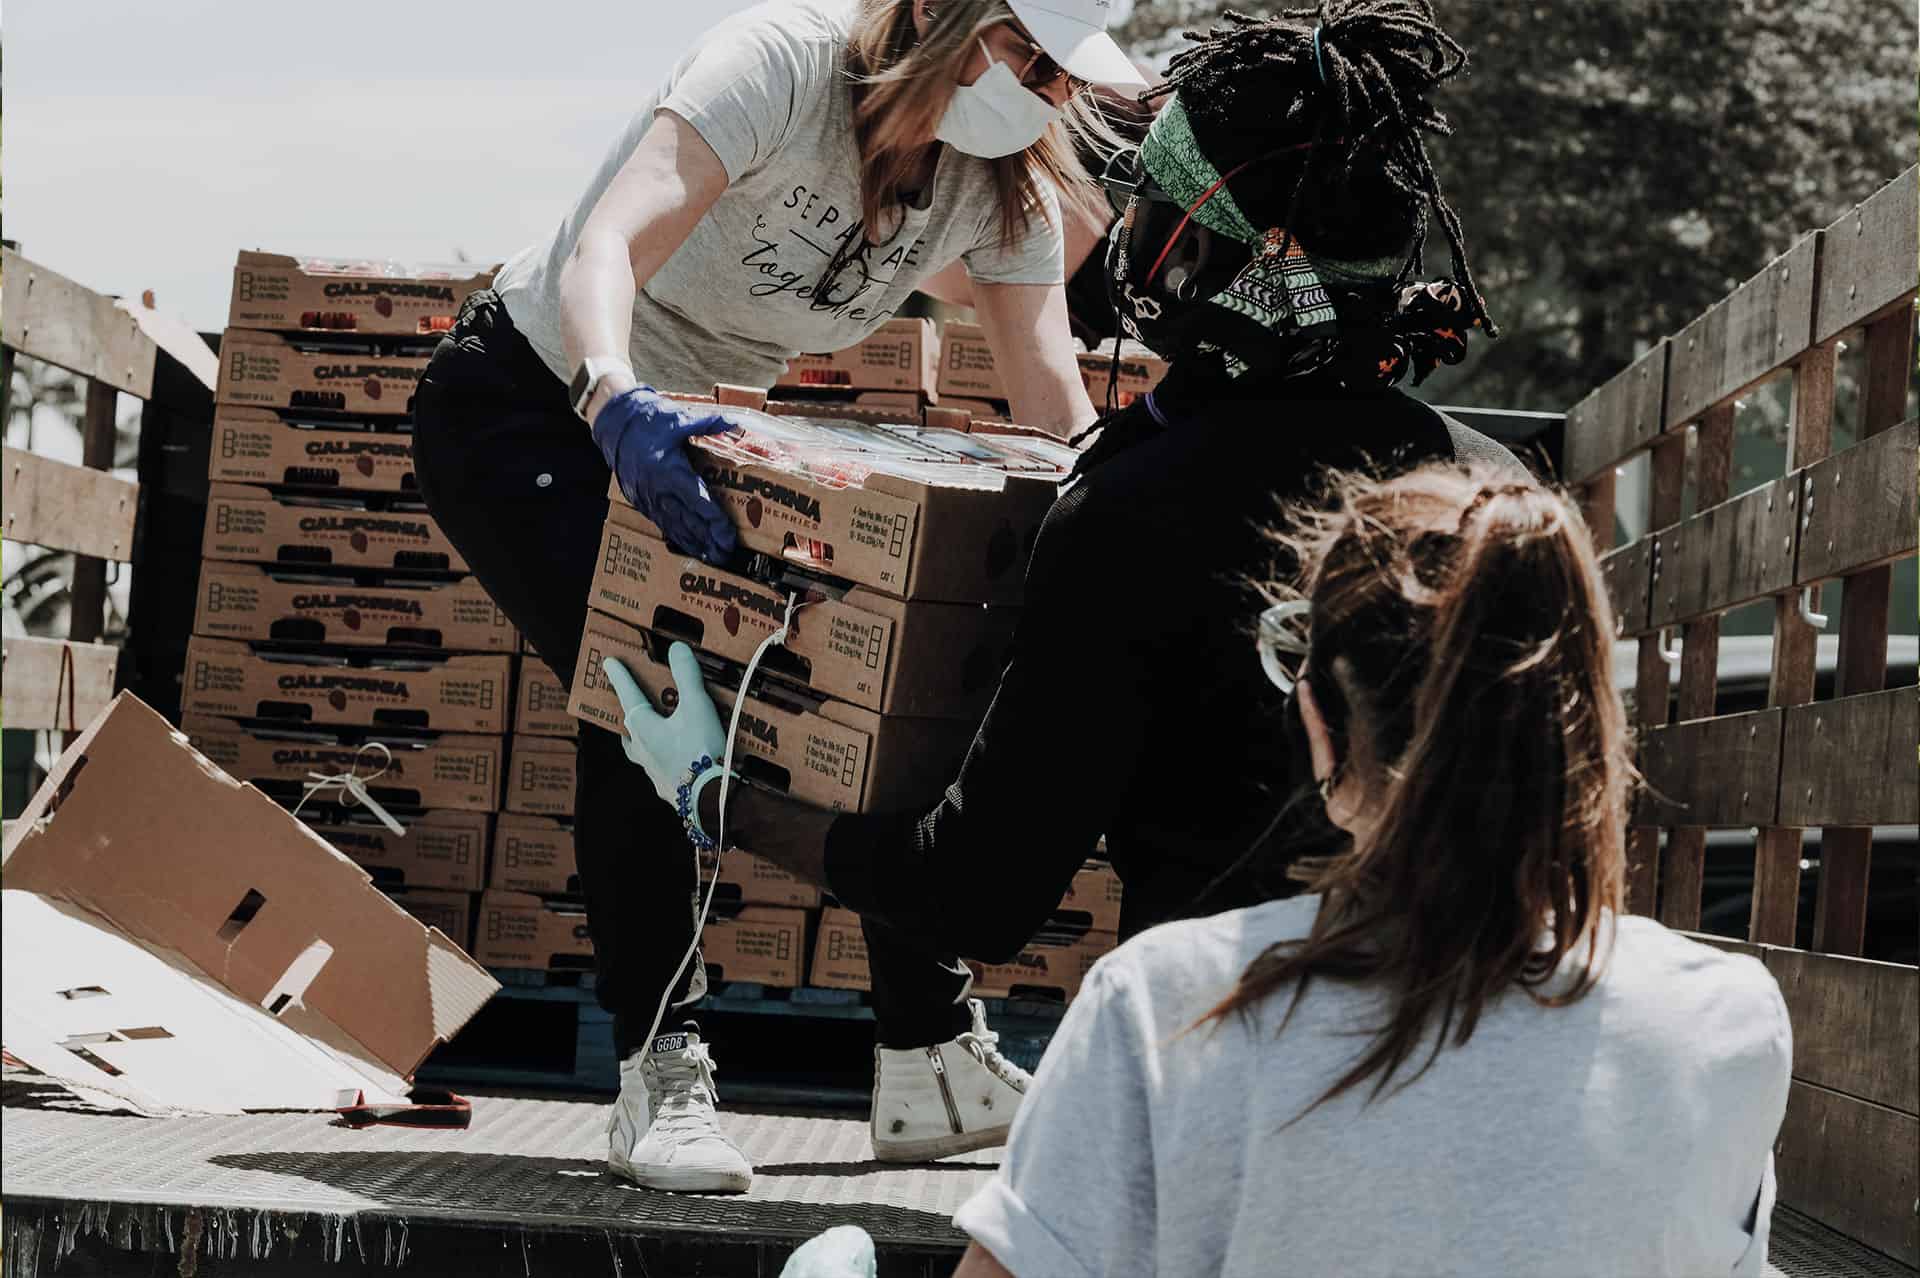 group of people unloading boxes of food from a truck